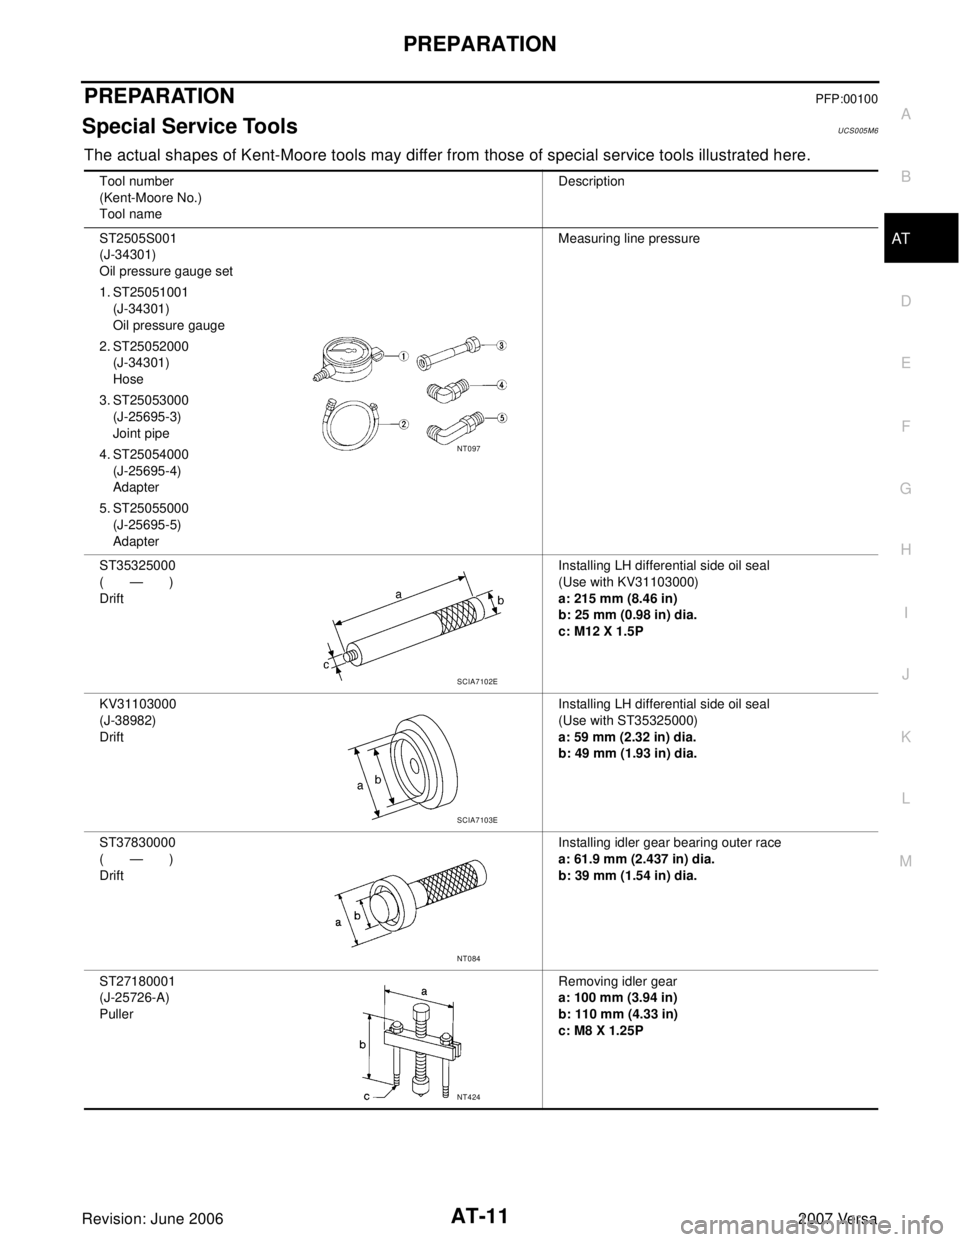 NISSAN VERSA 2006  Workshop  Service Repair Manual PREPARATION
AT-11
D
E
F
G
H
I
J
K
L
MA
B
AT
Revision: June 20062007 Versa
PREPARATIONPFP:00100
Special Service ToolsUCS005M6
The actual shapes of Kent-Moore tools may differ from those of special serv